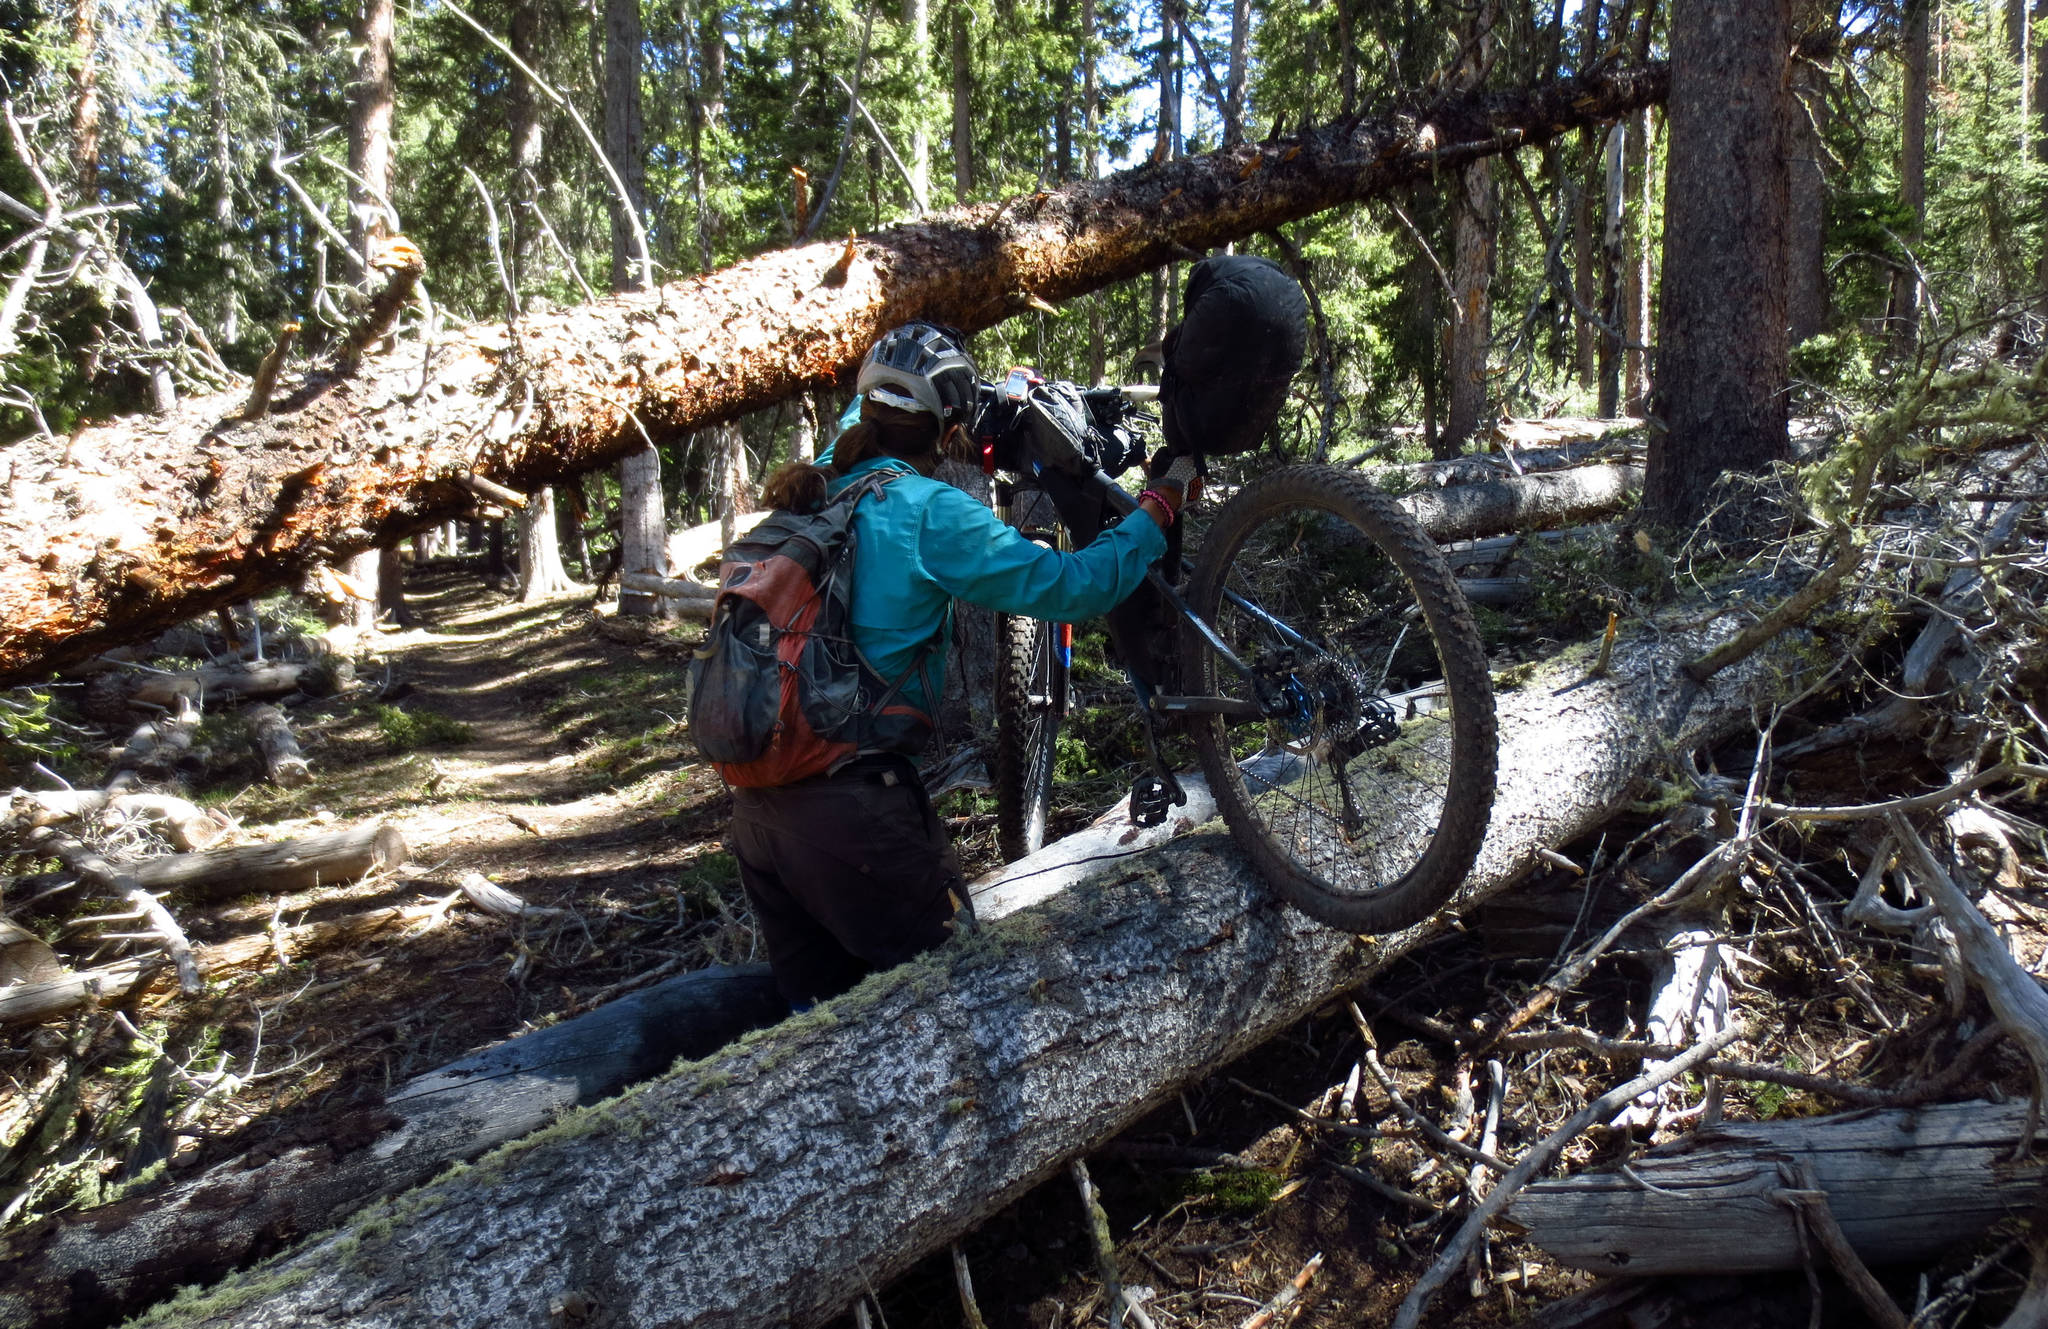 In this June 2, 2014 photo provided by Scott Morris, Eszter Horanyi carries her loaded bikepacking bike over downed trees in New Mexico on the Continental Divide Trail. (Scott Morris via AP)